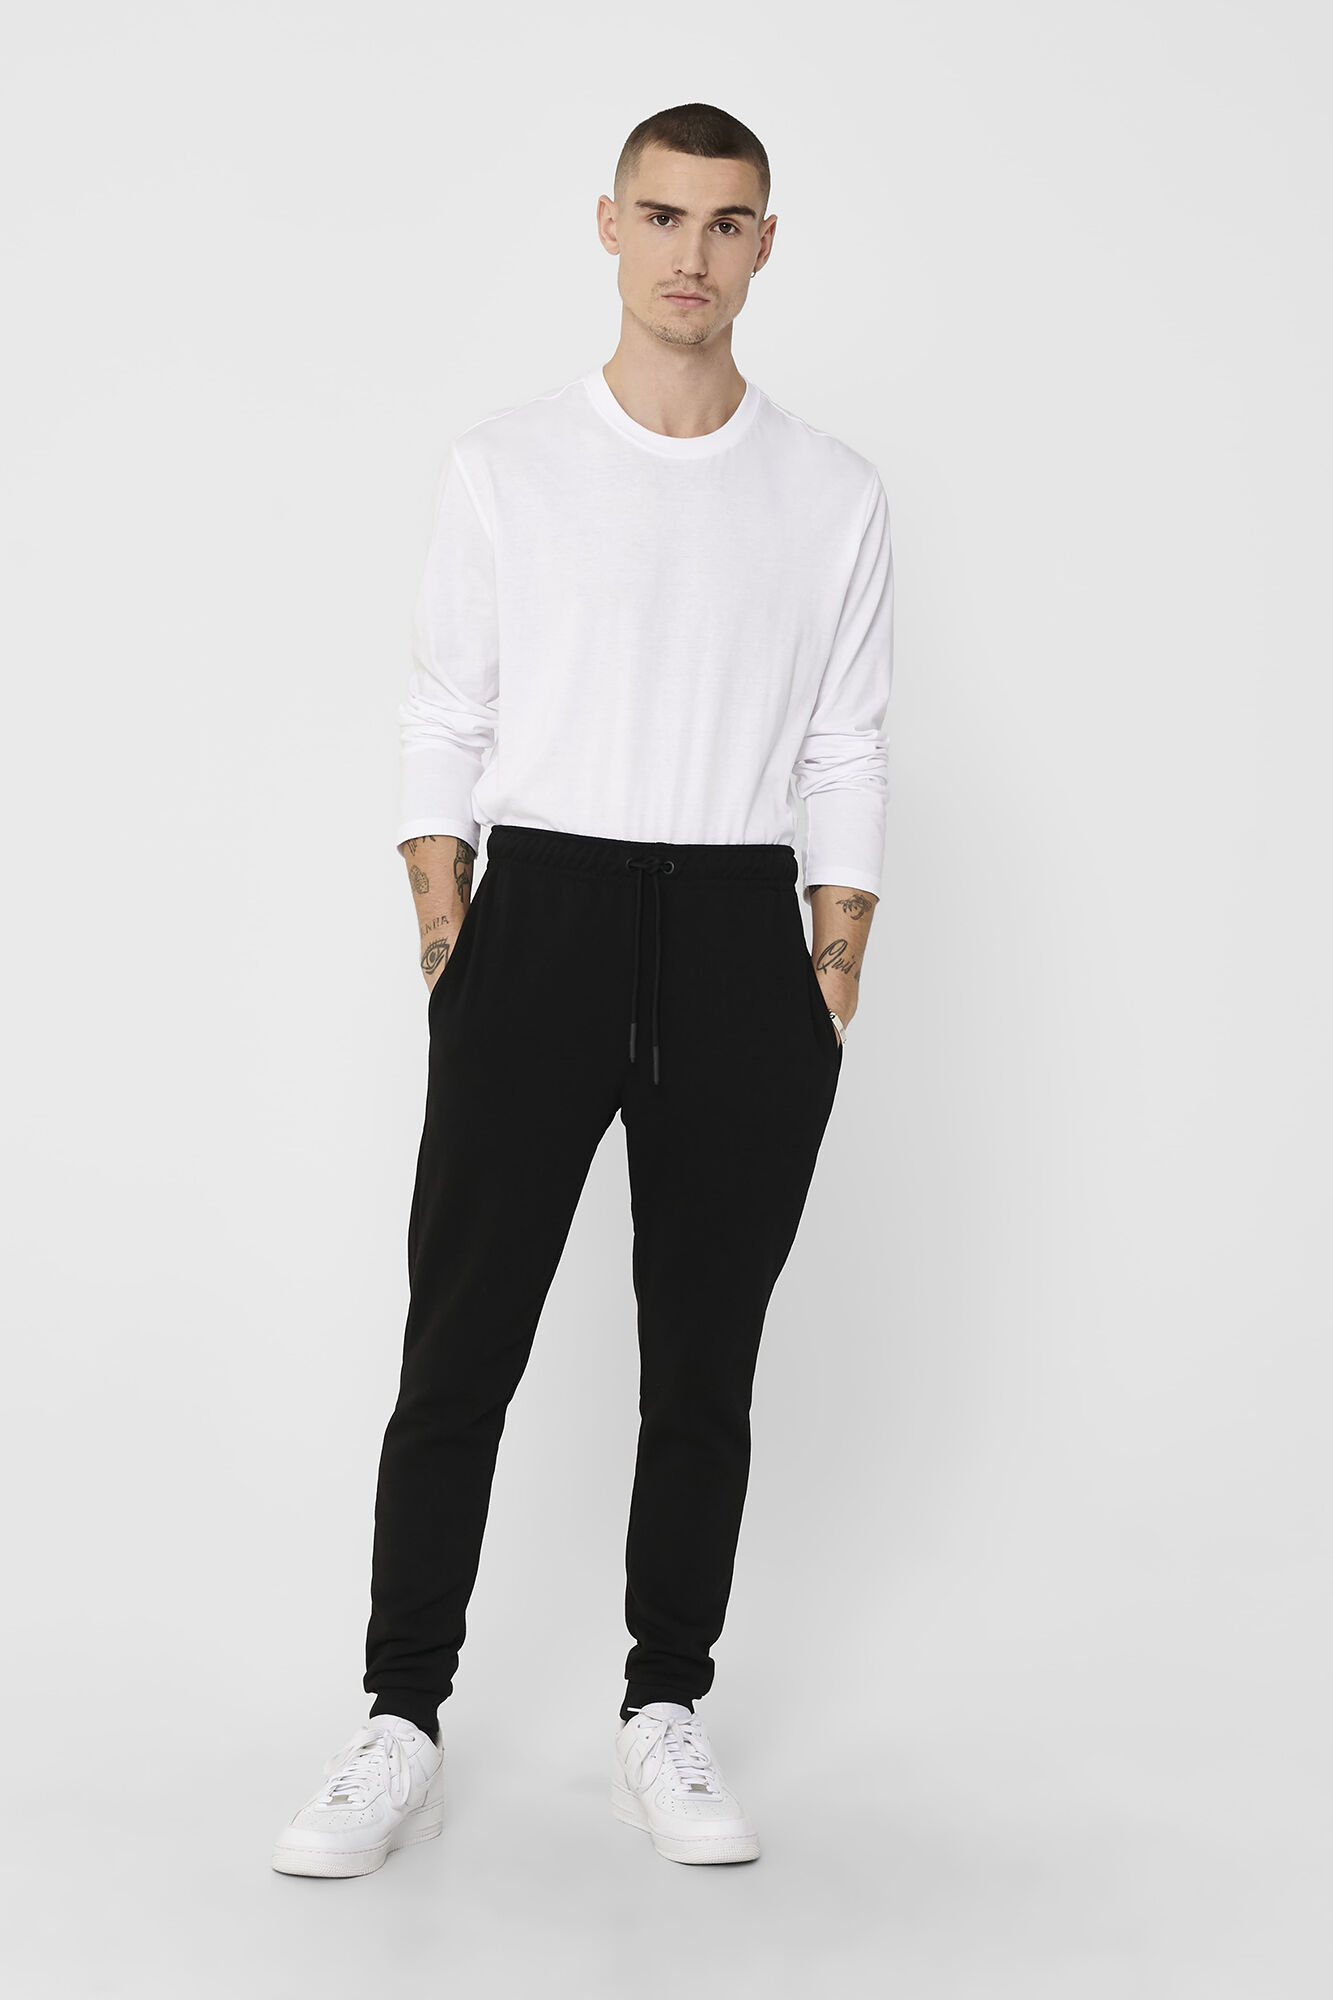 Thin sports trousers - Black - Men | H&M IN